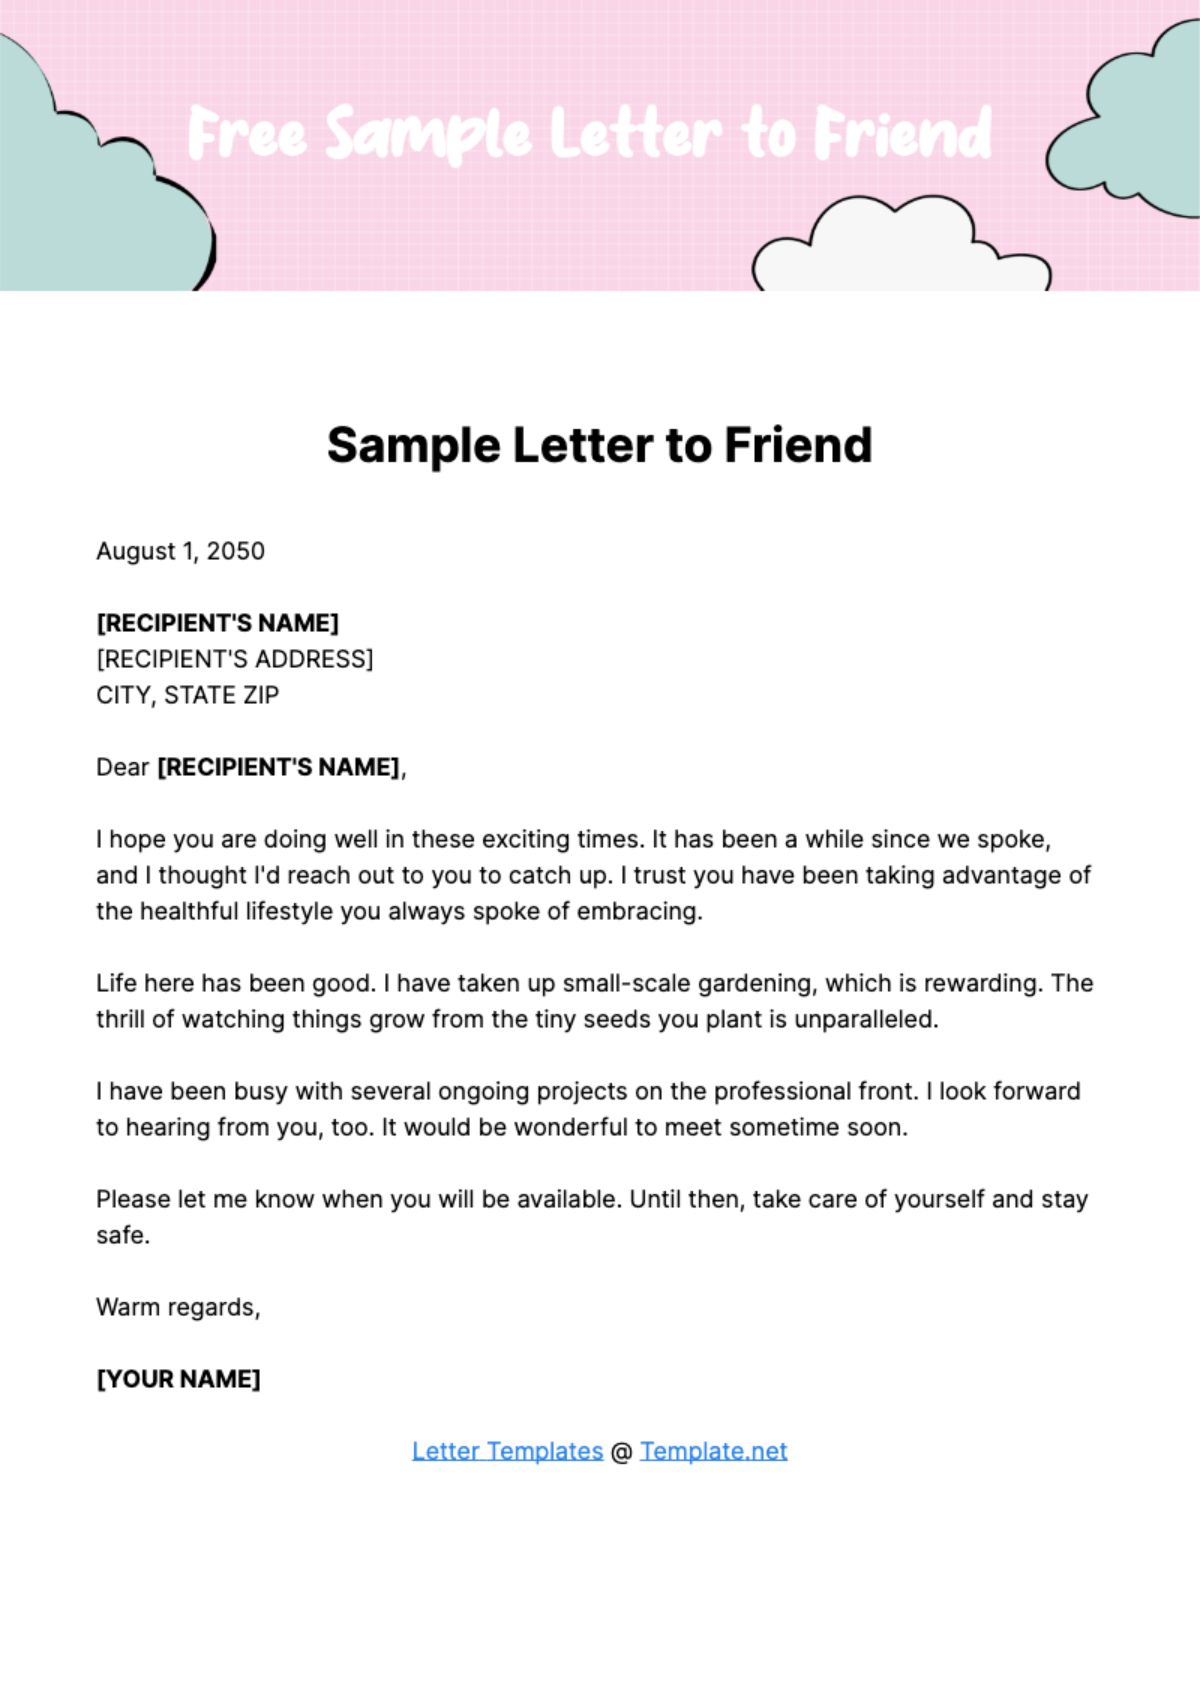 Free Sample Letter to Friend Template